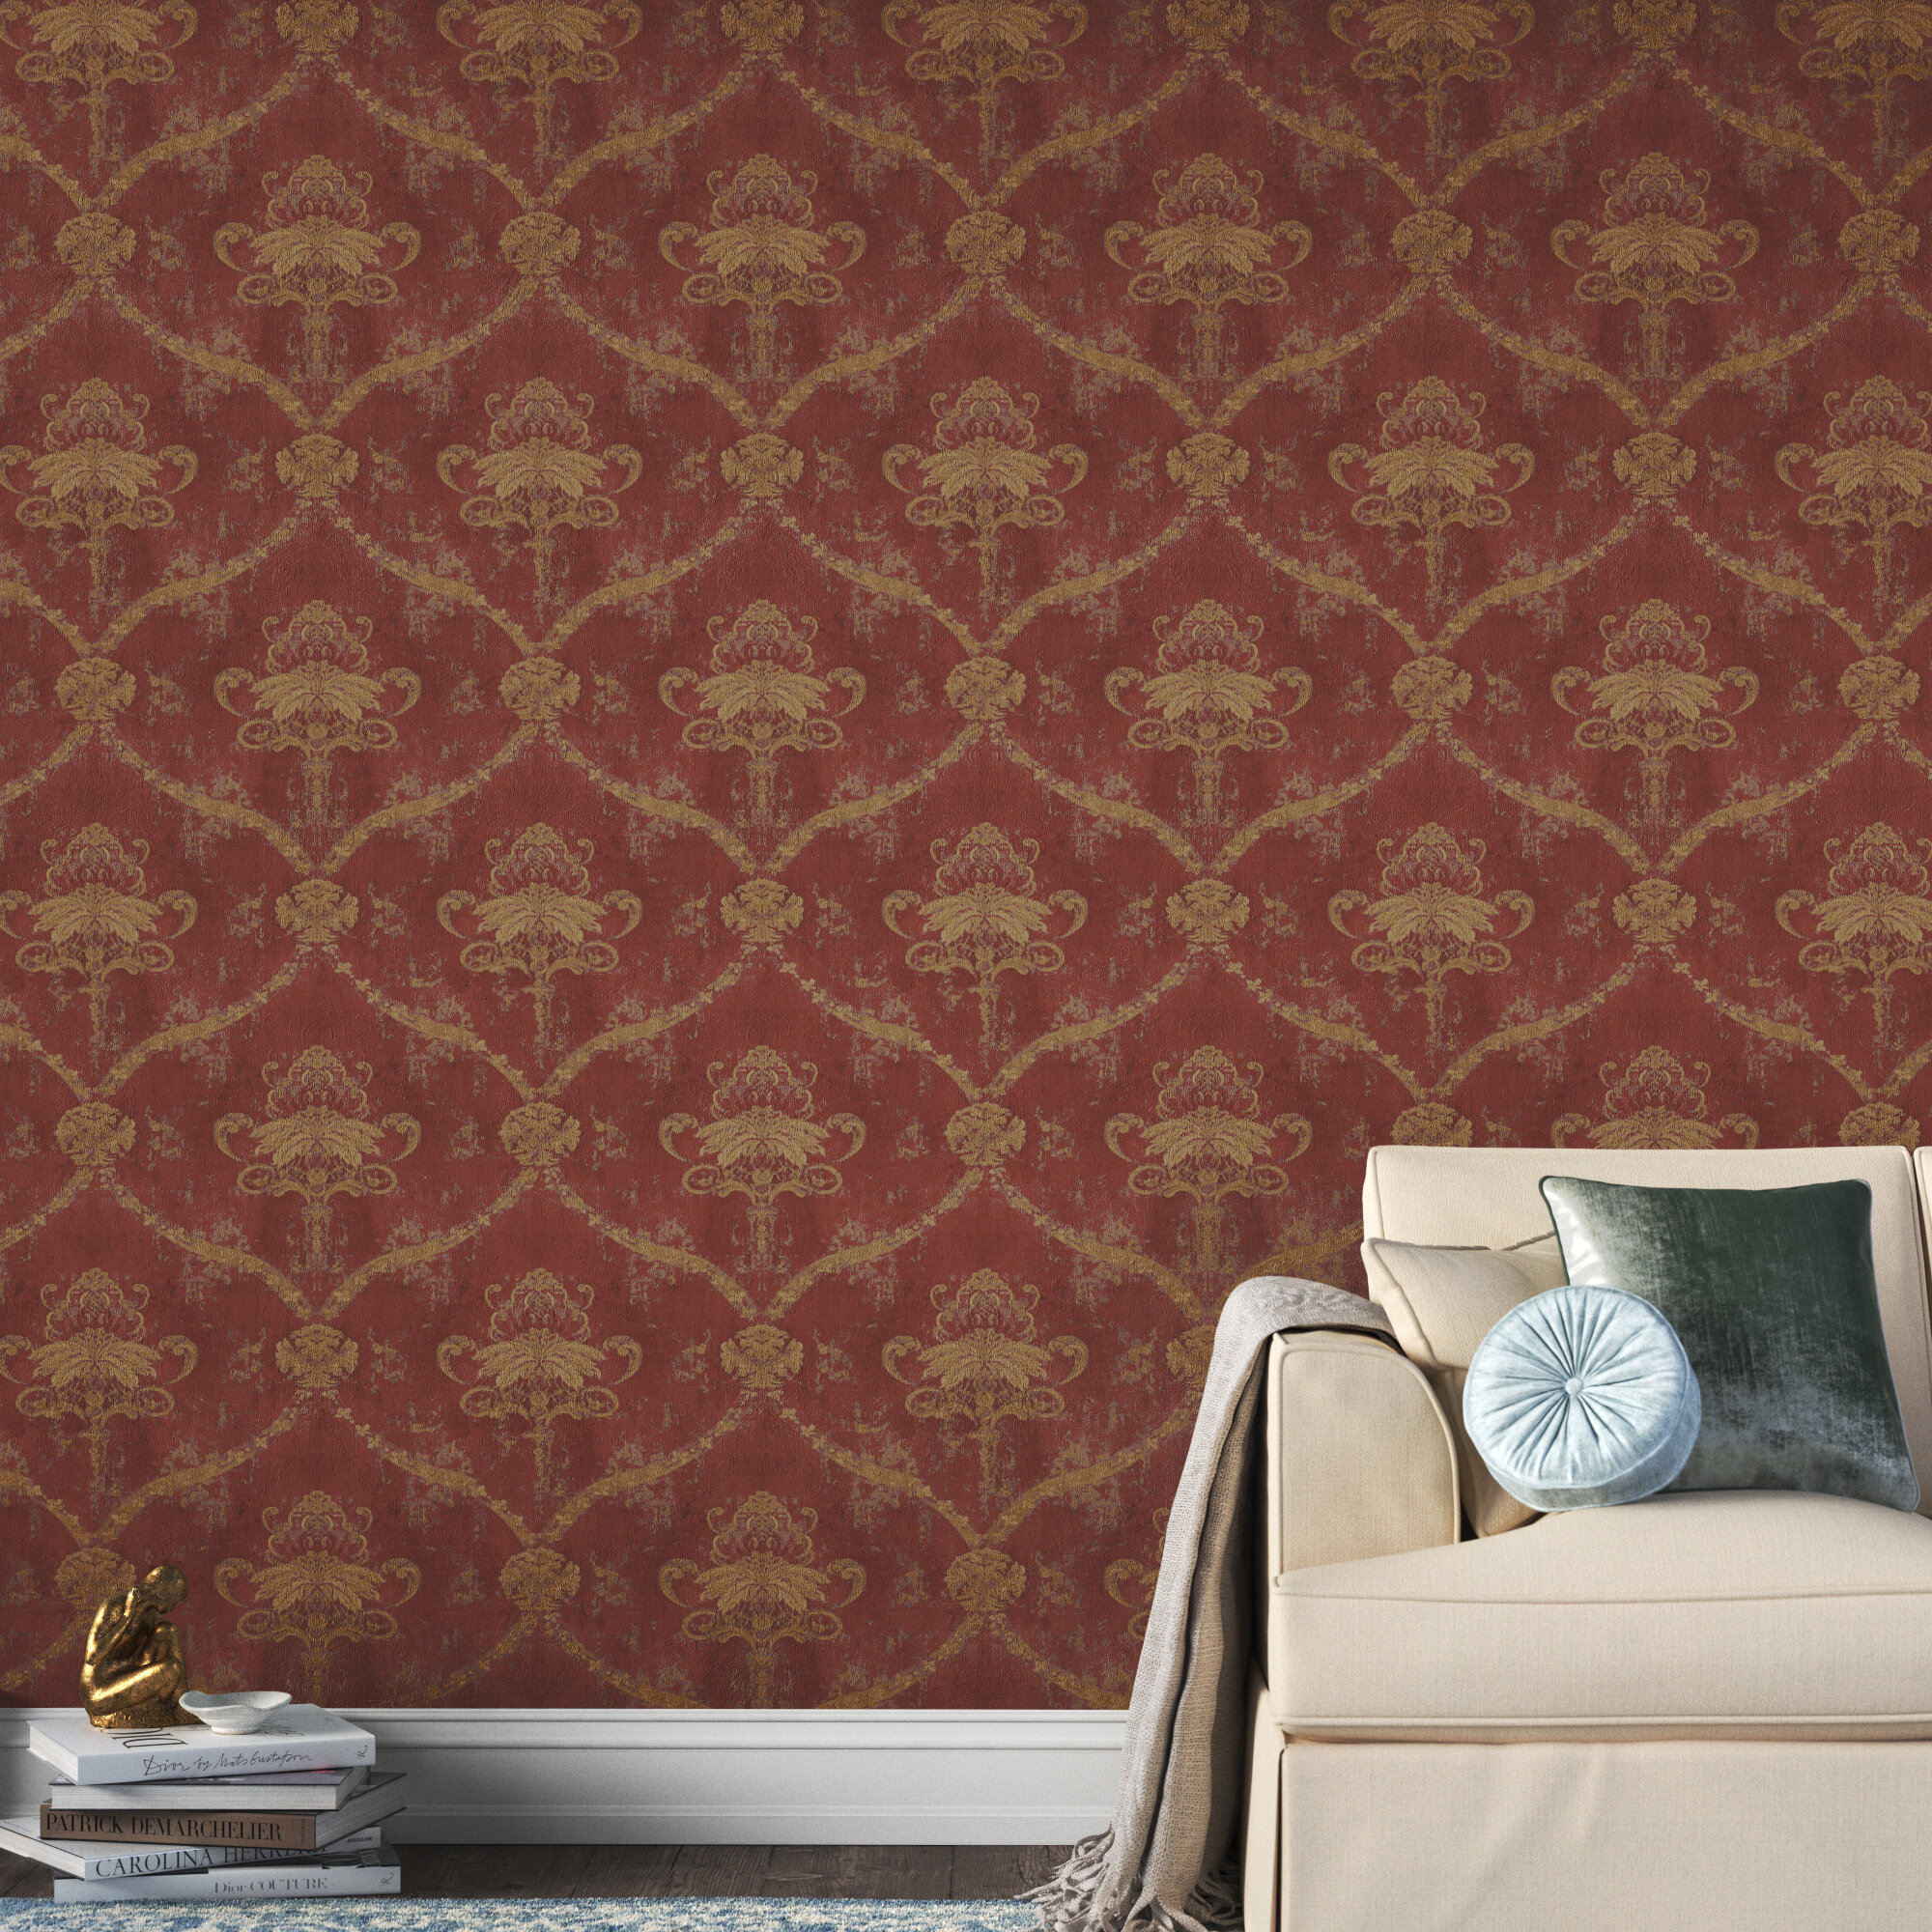 Red Damask Wallpapers